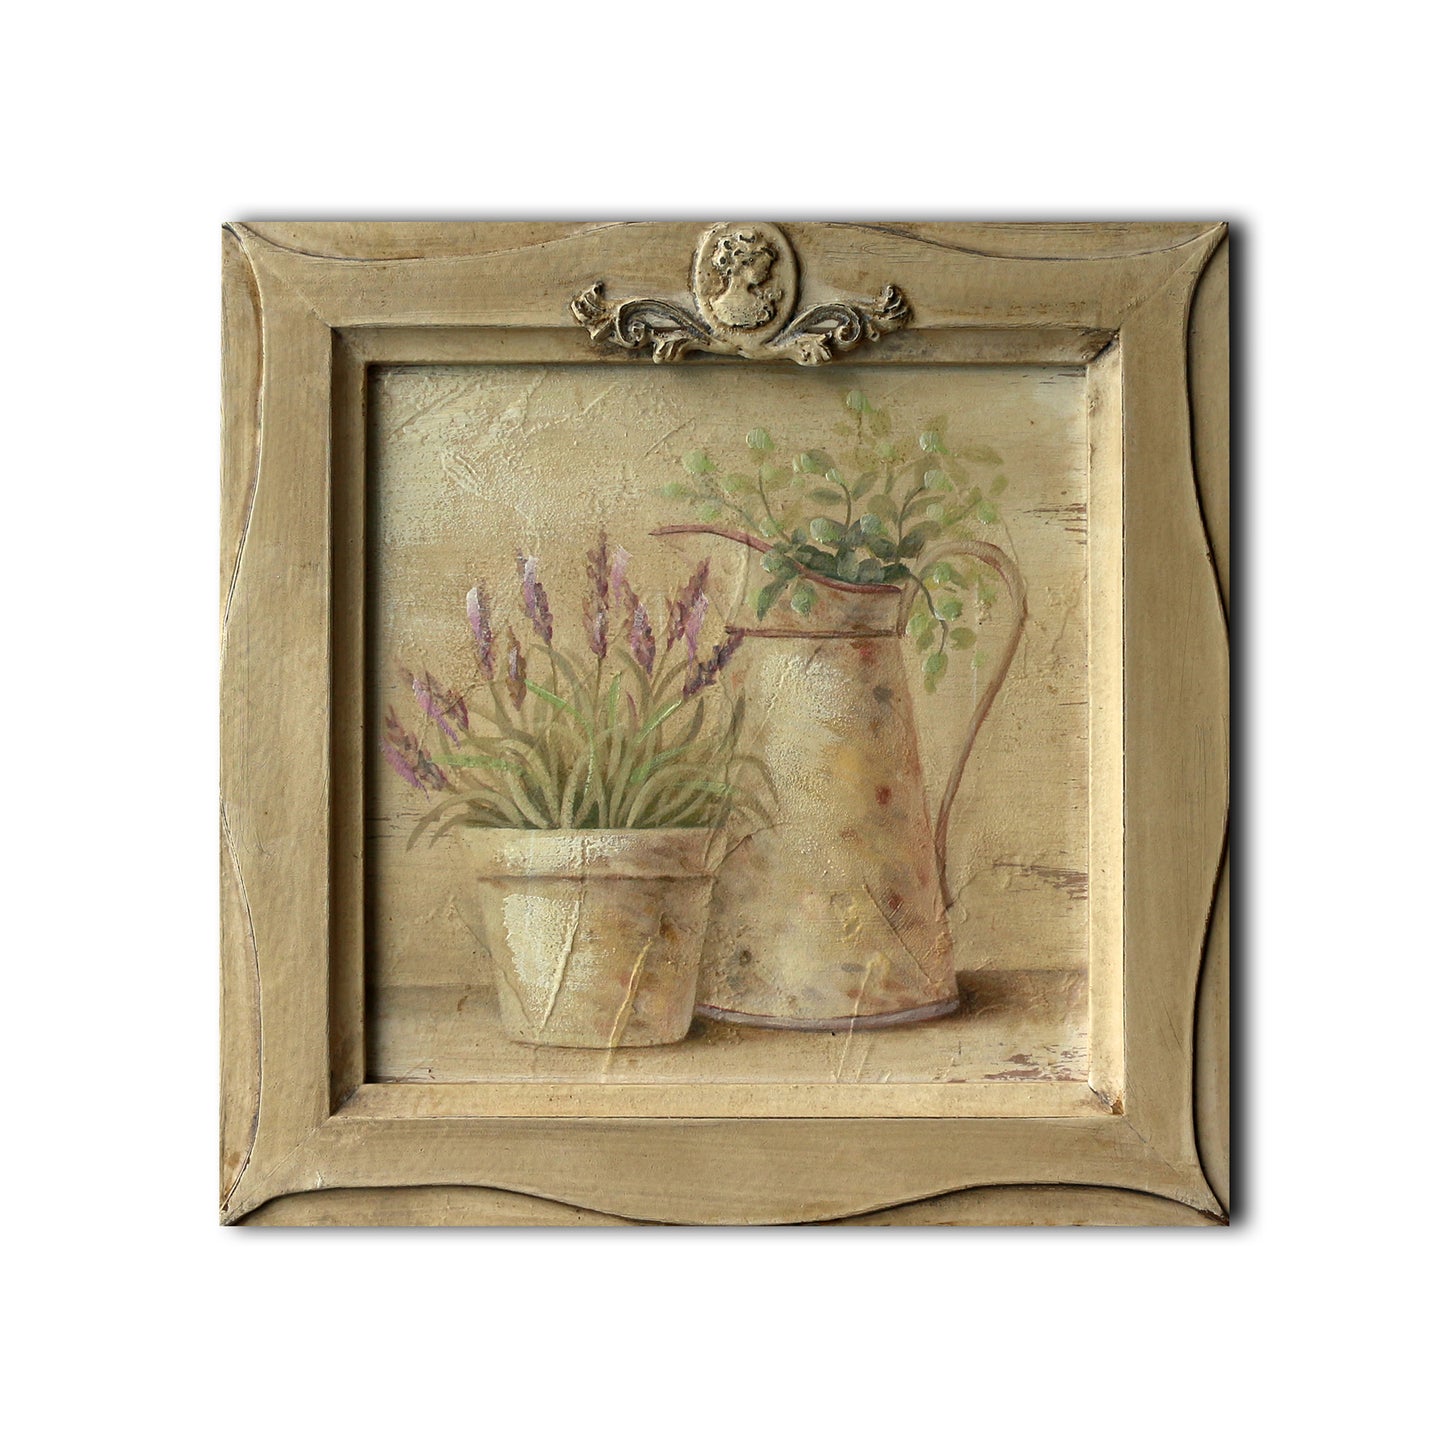 CVHOMEDECO. Country Vintage Hand Painted Wooden Frame Wall Hanging 3D Painting Landscape Art Décor, Plant and Jar Design, 11 x 11 Inch